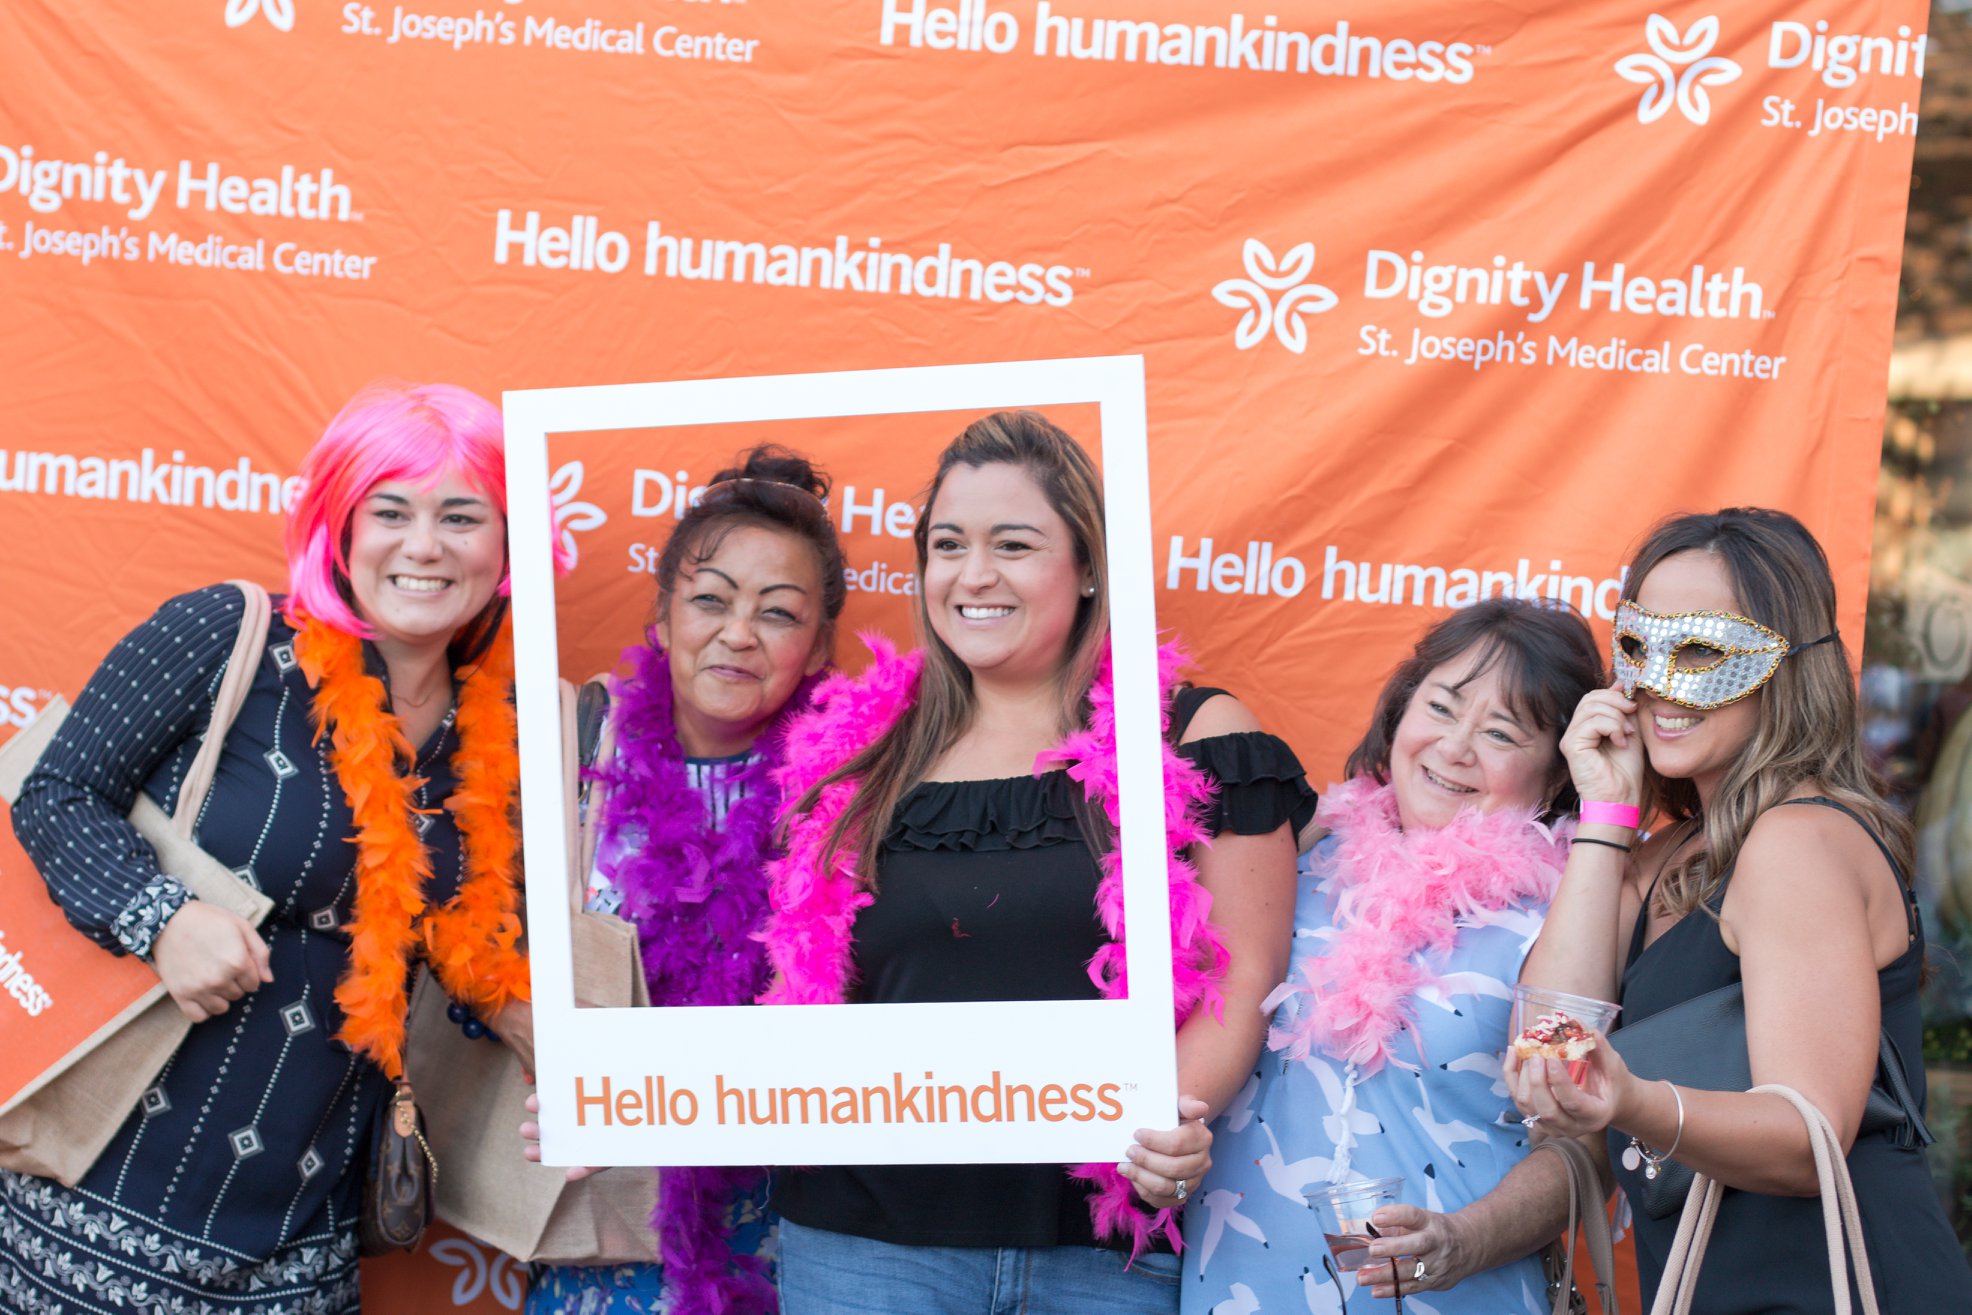 Group of women dressed in pink posing in front of Dignity Health Step and Repeat